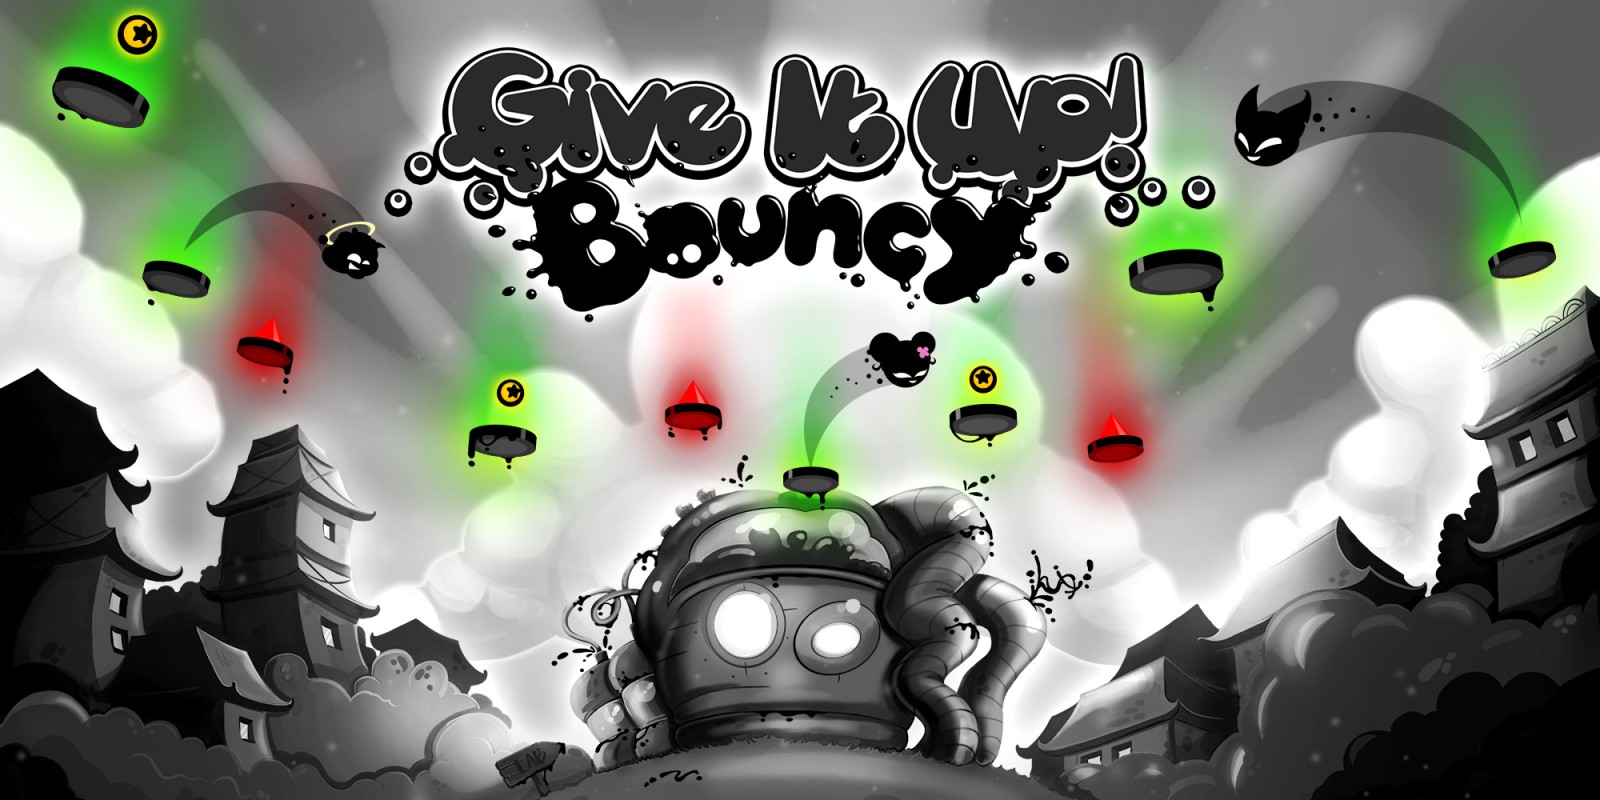 Give It Up! Bouncy